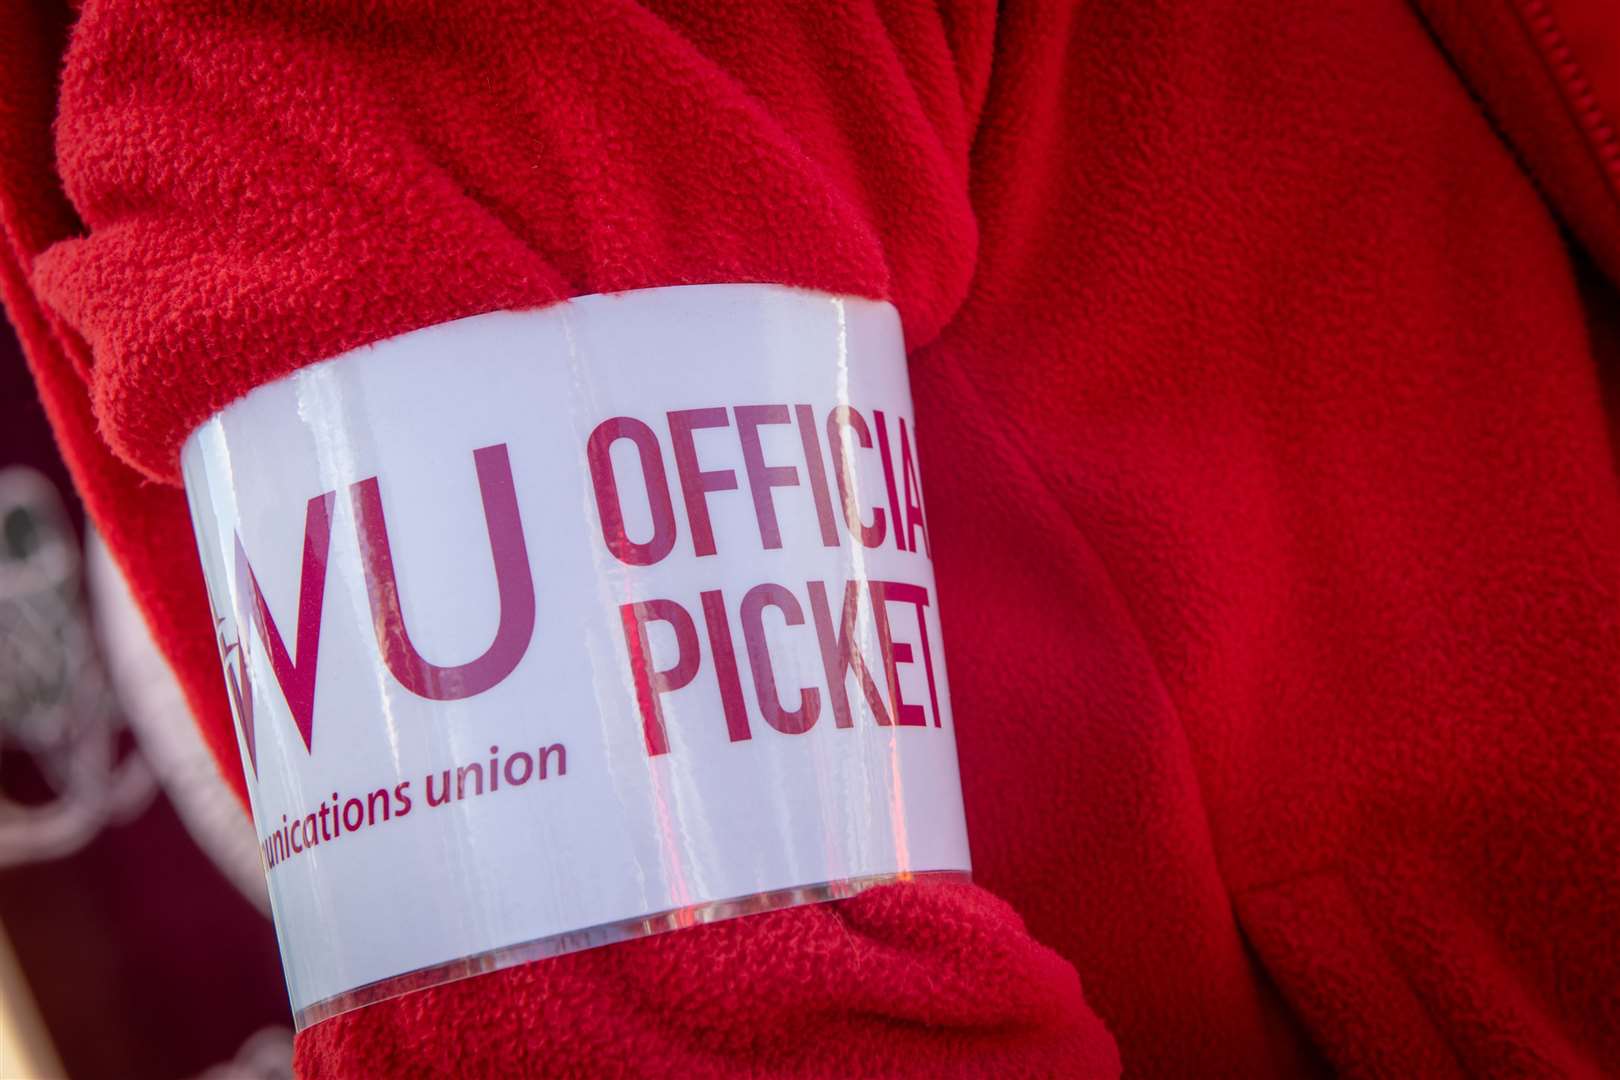 Members of the Communications Workers Union will walk out again on Thursday and Friday. Picture: Callum Mackay